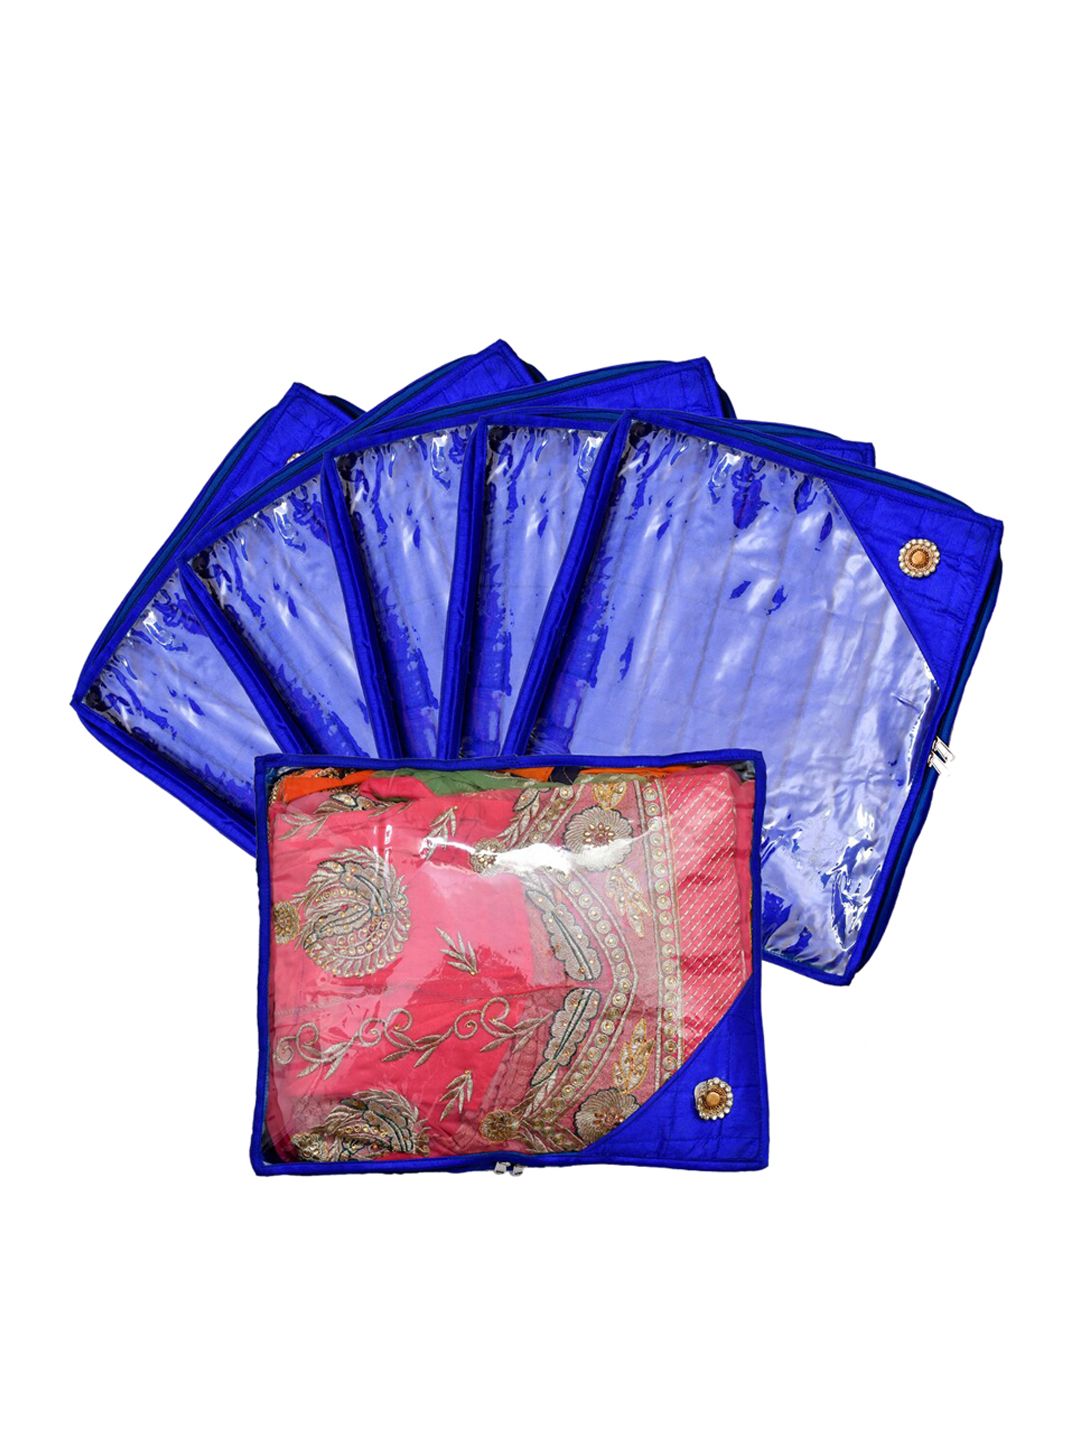 Kuber Industries Set Of 6 Blue & Transparent Solid Single Packing Saree Cover Organizers Price in India